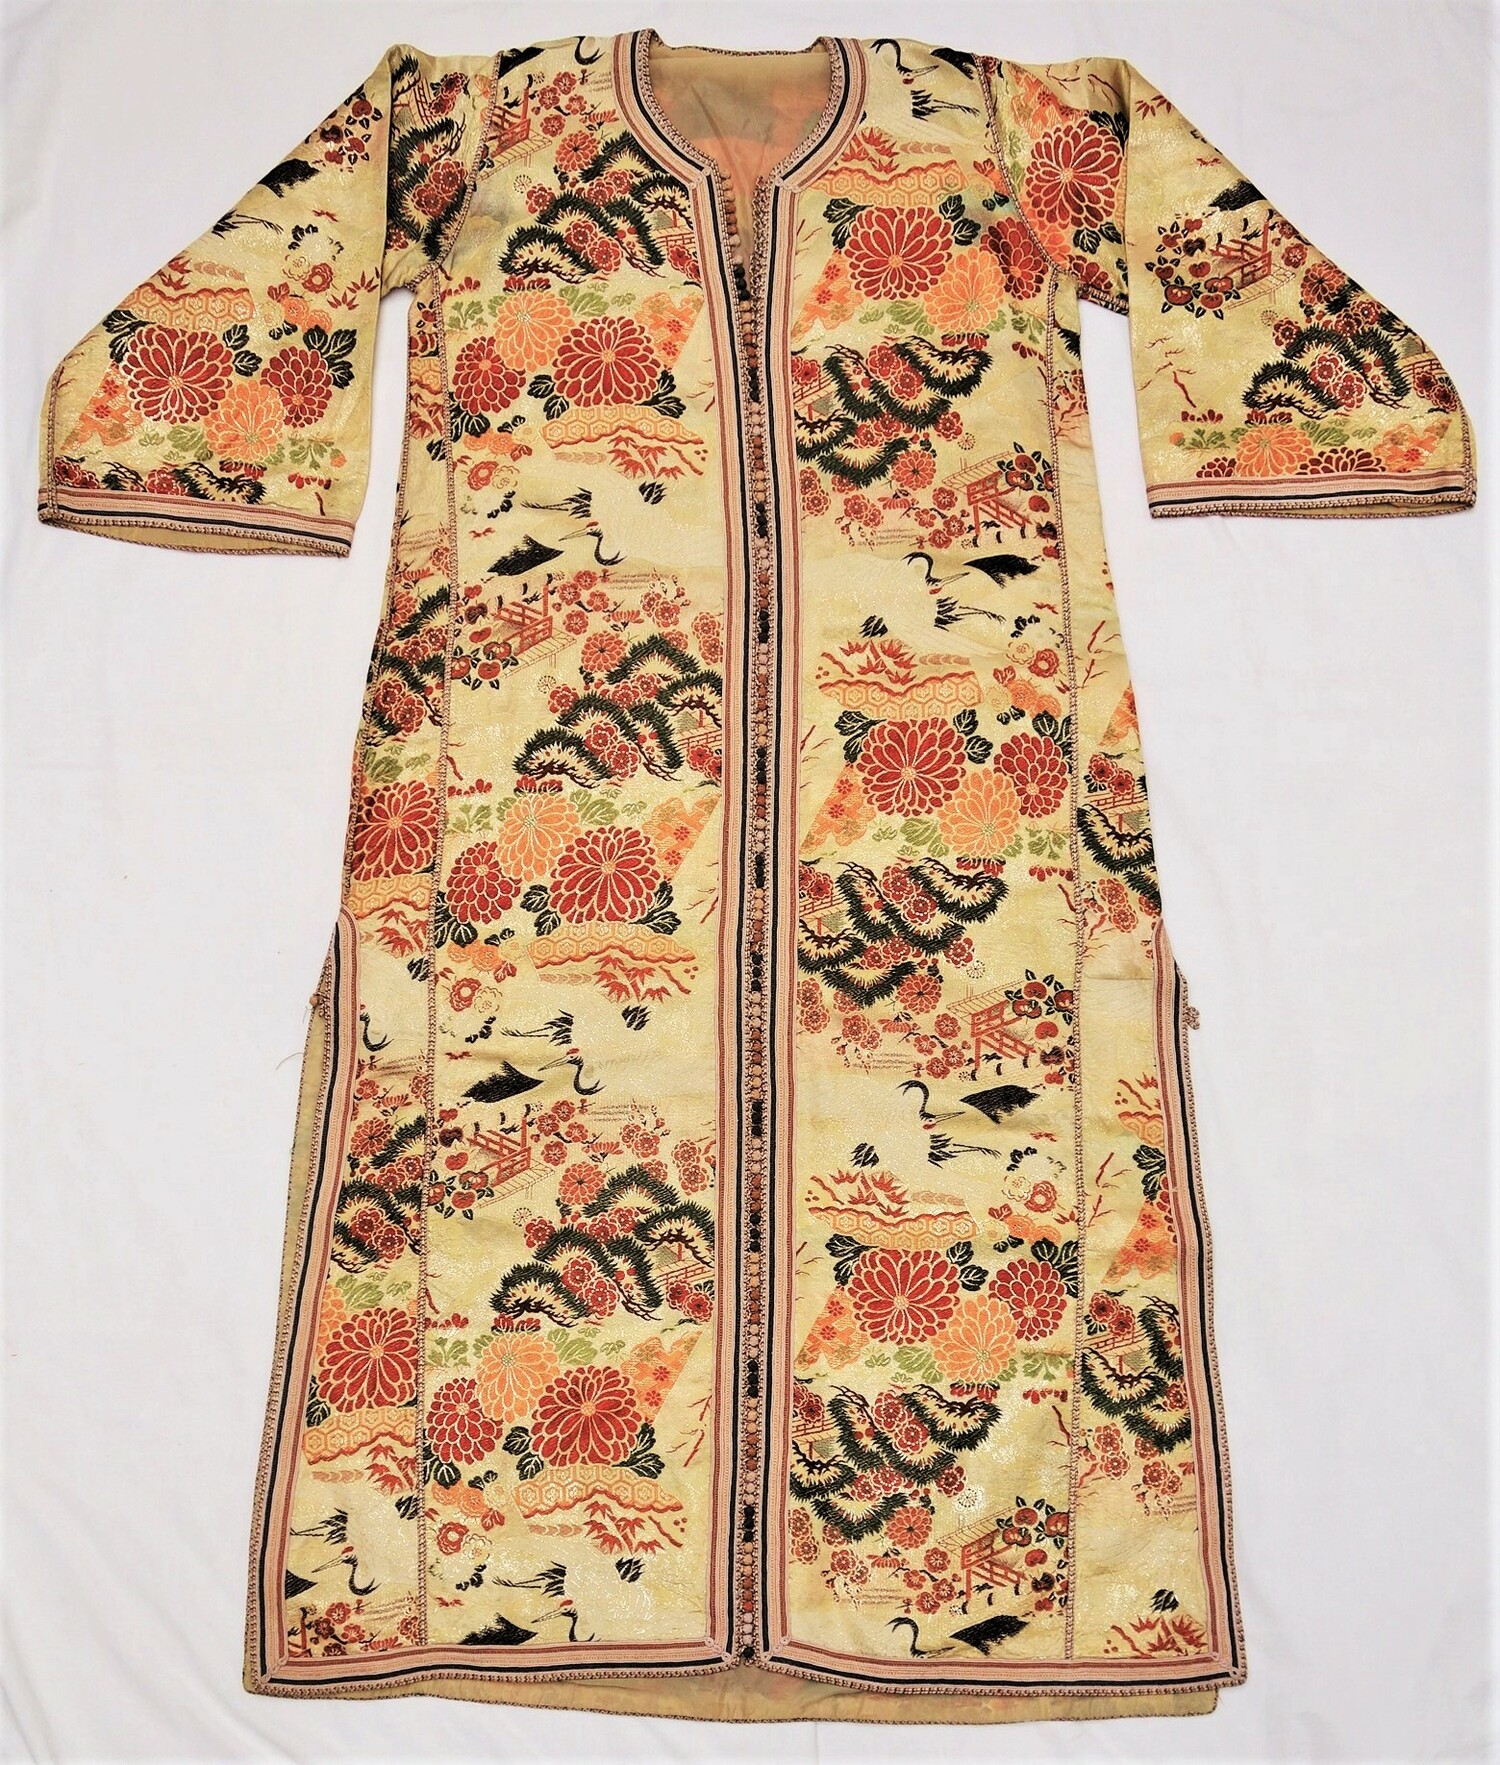 Woman's kaftan from Morocco, made from a Japanese obi. Morocco, late 20th century (TRC 2001.0074).